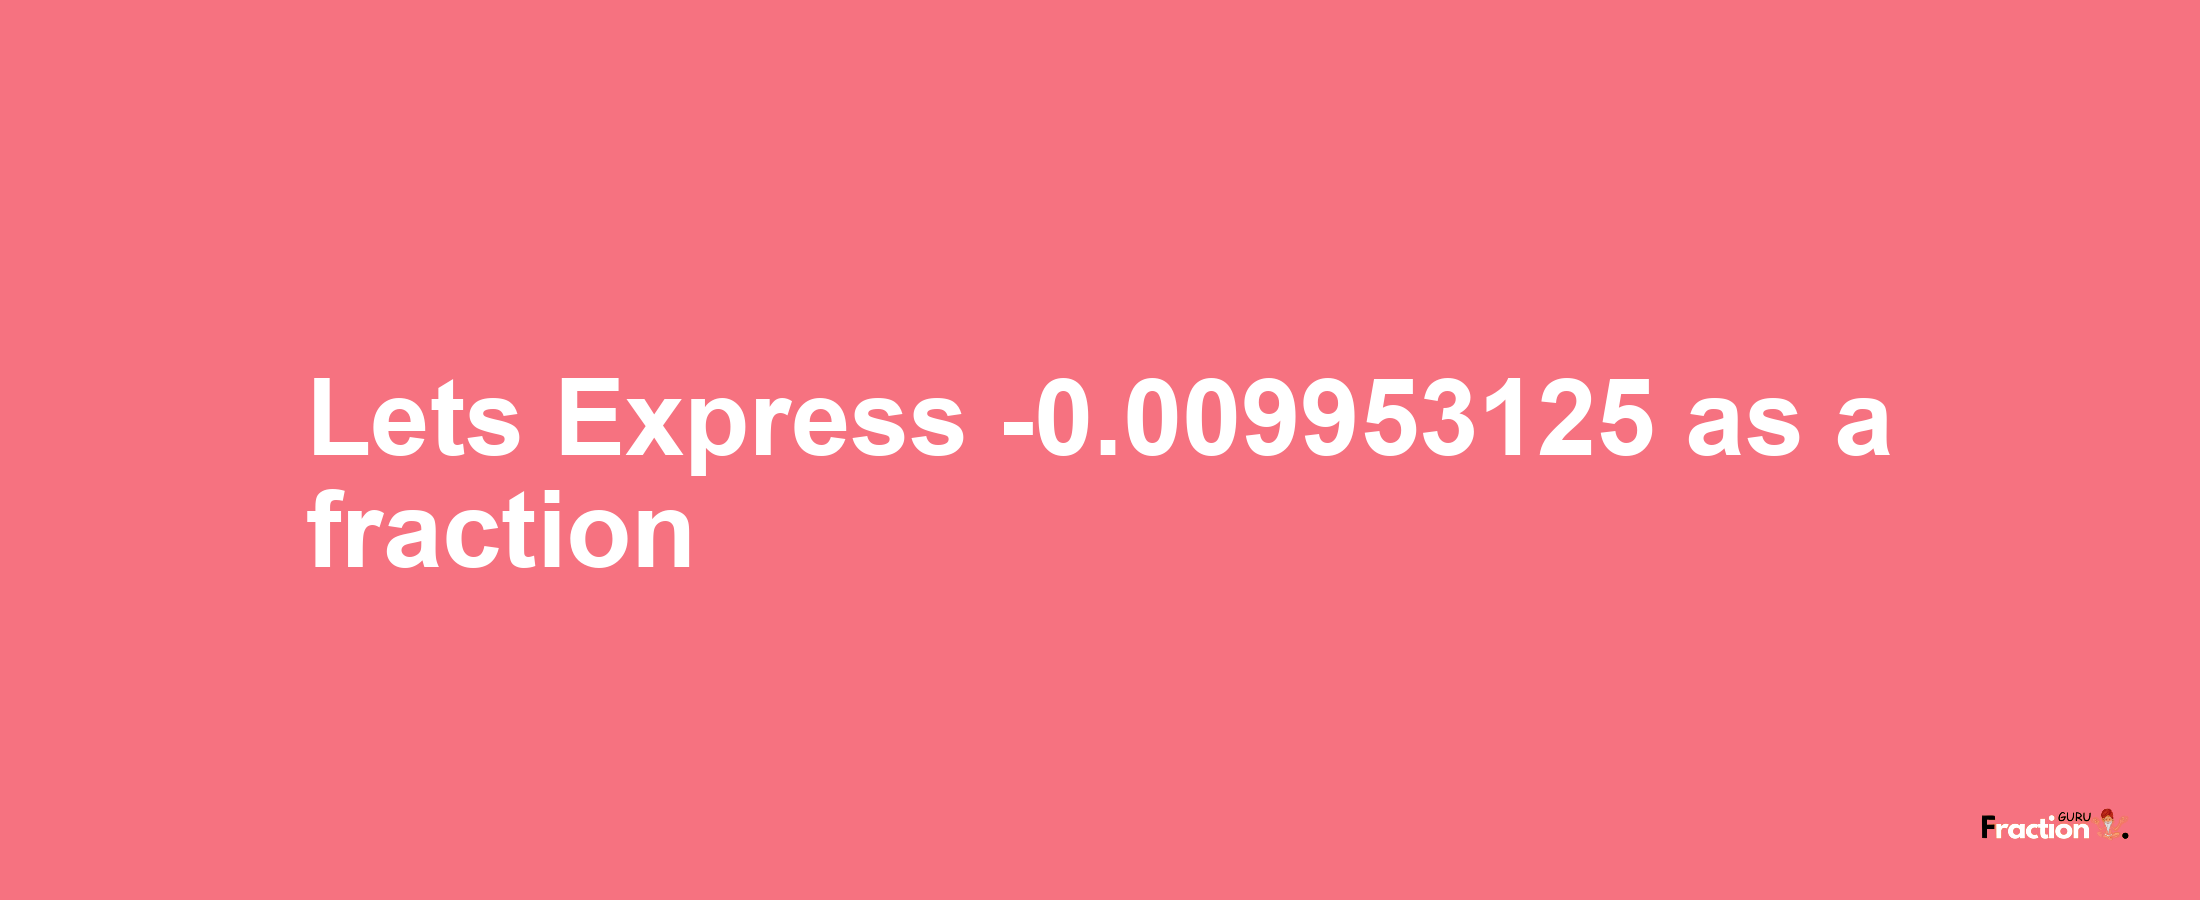 Lets Express -0.009953125 as afraction